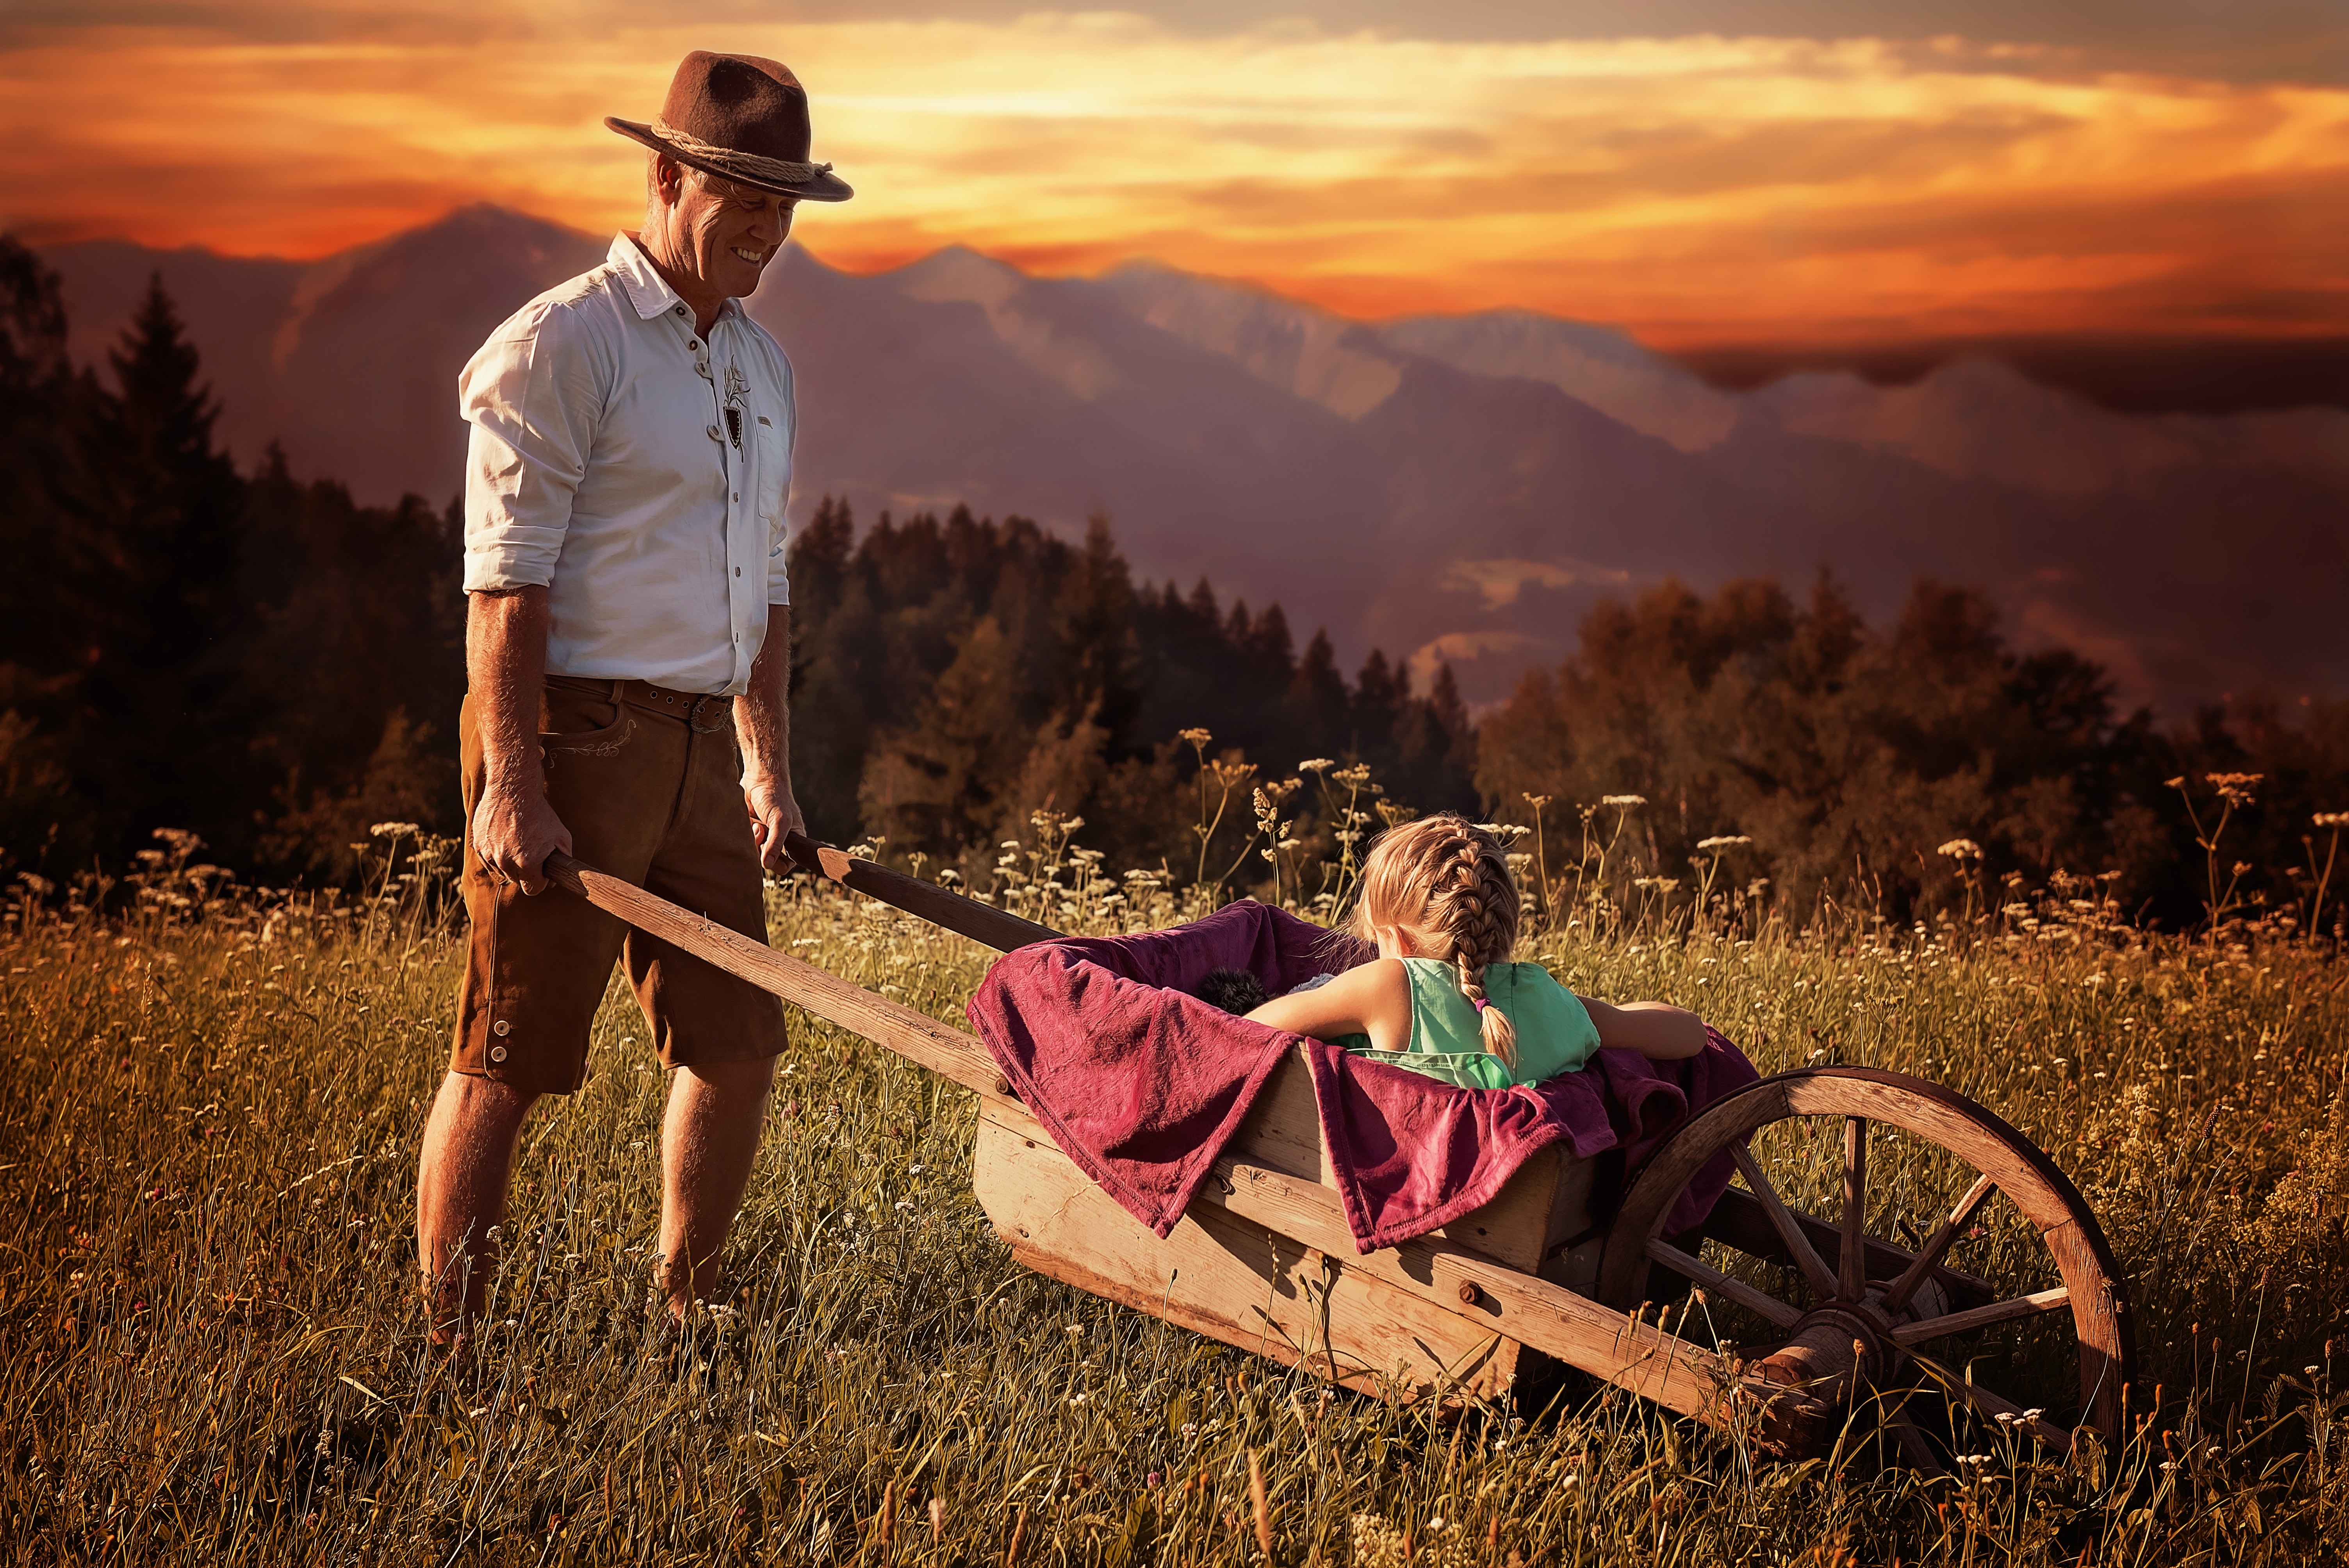 girl riding on brown wooden wheelbarrow carrying by man during sunset